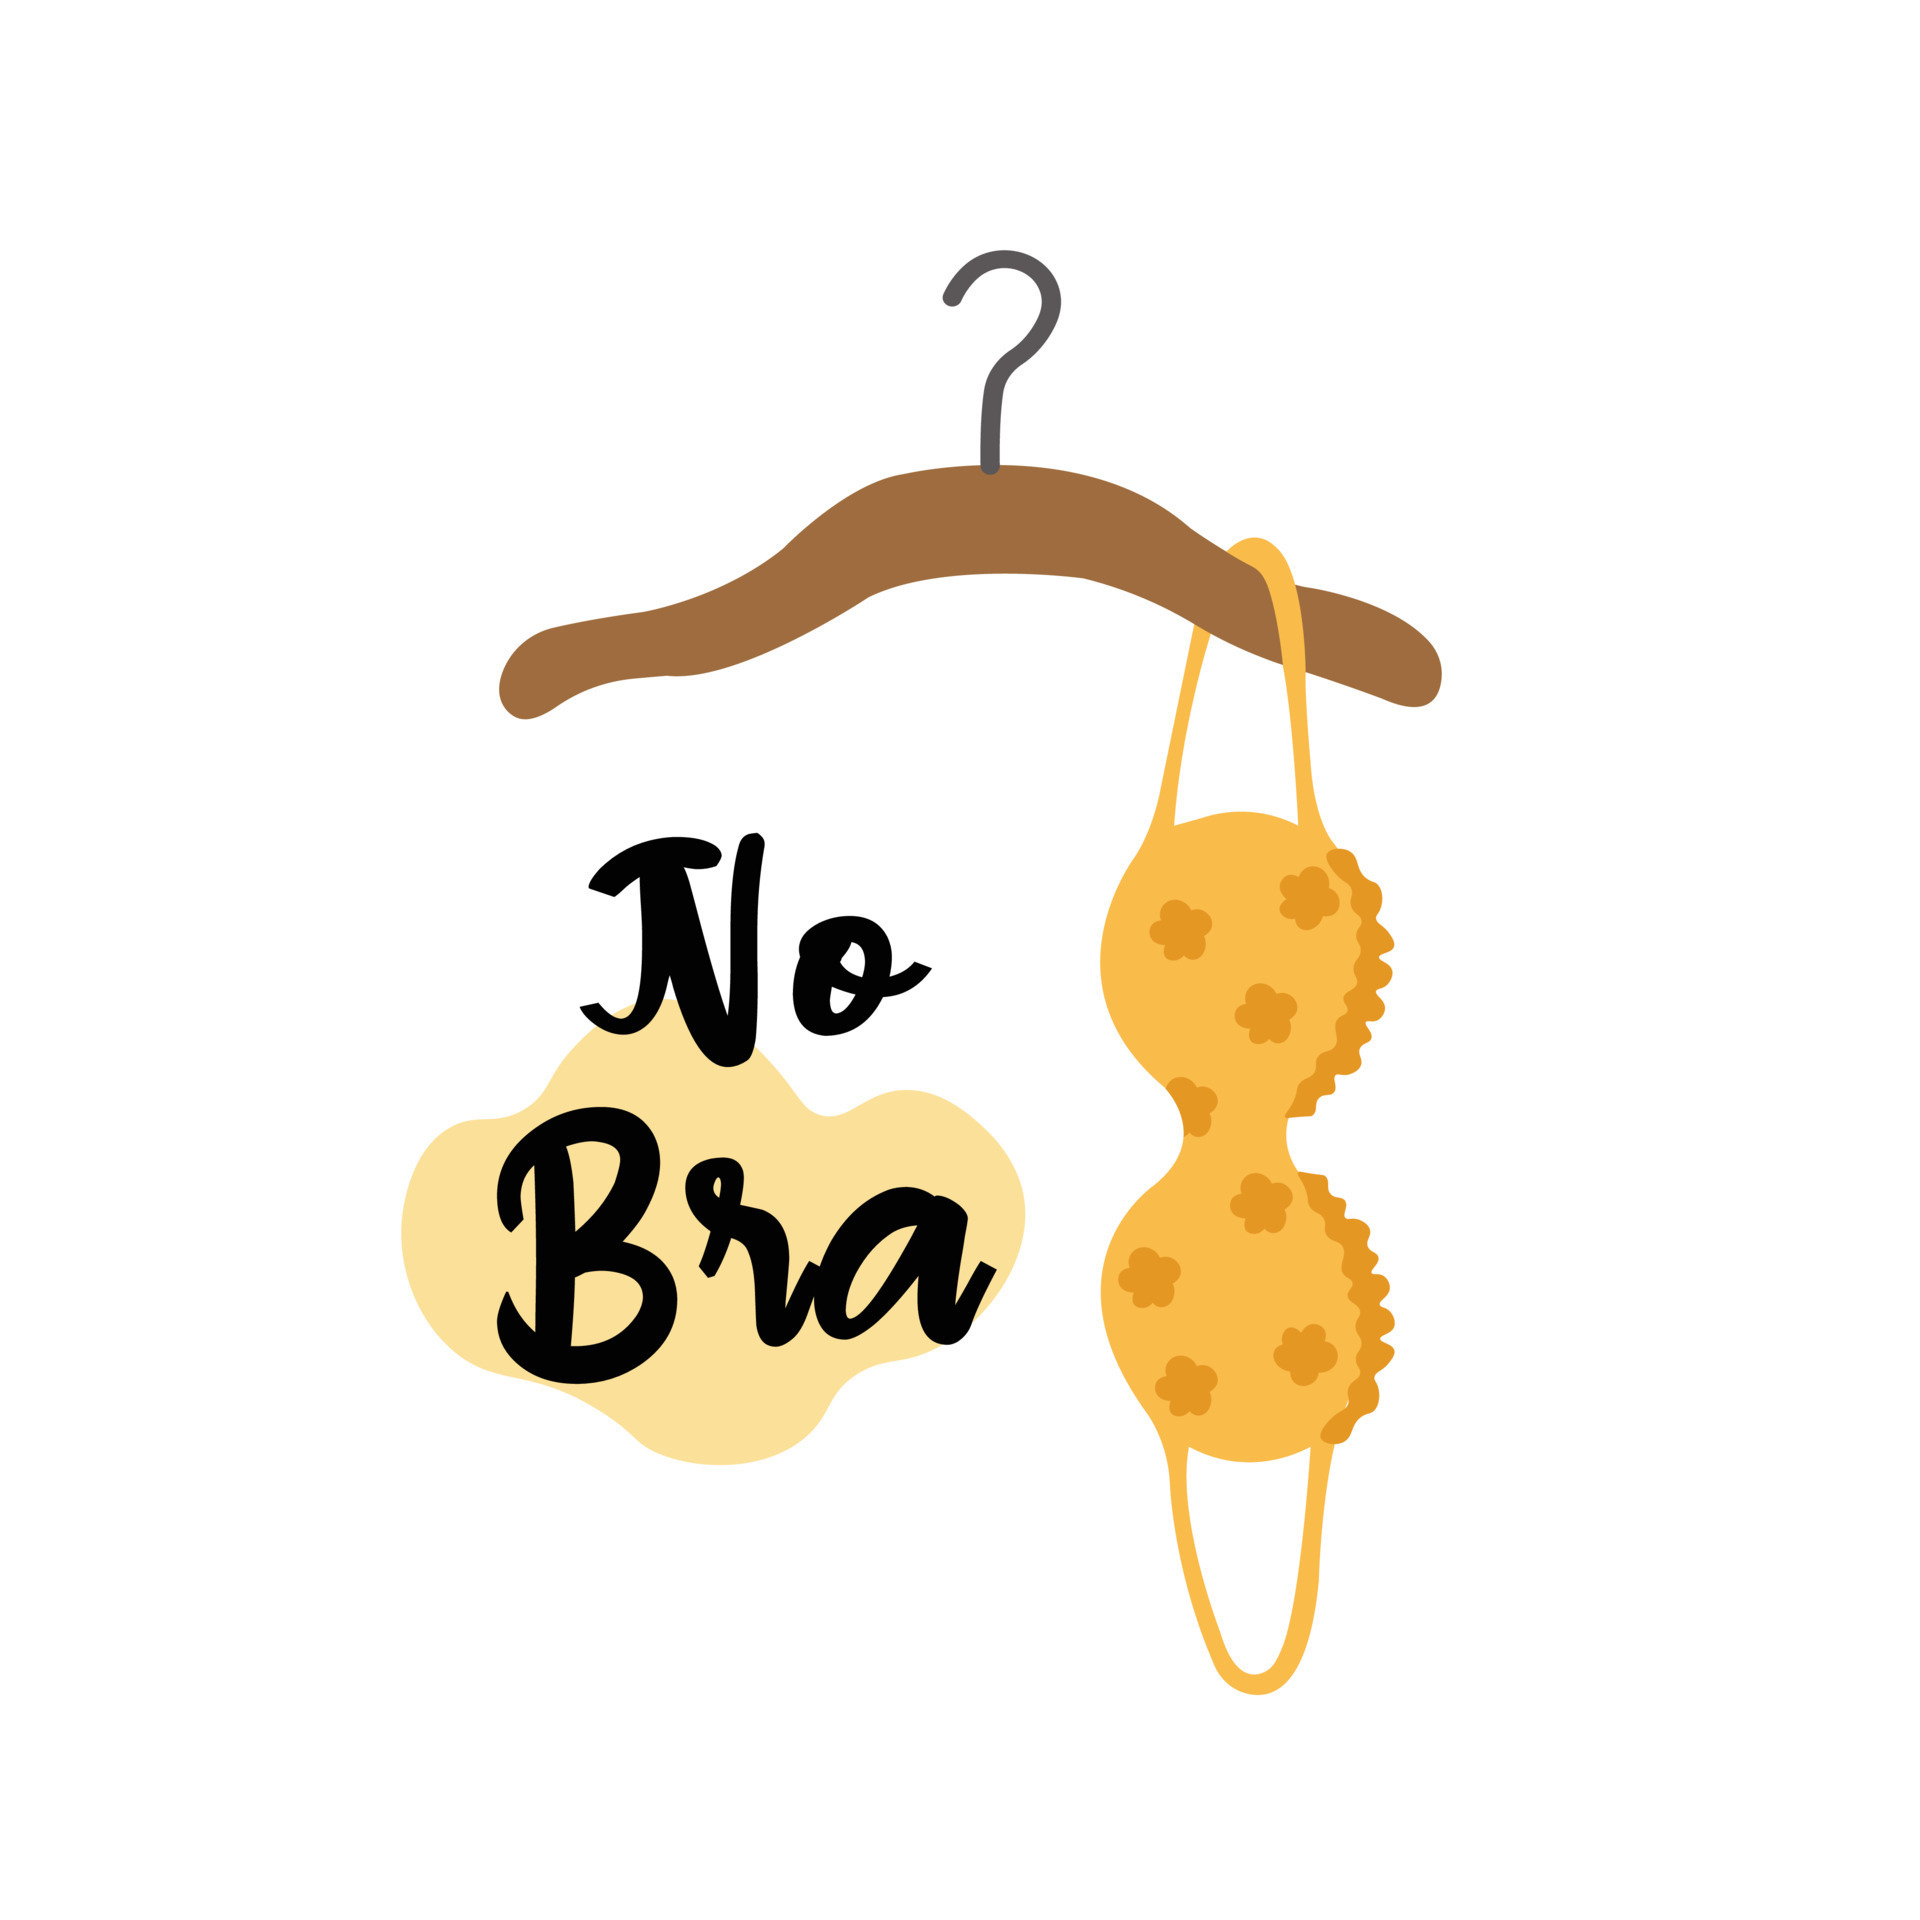 Handwritten lettering poster - No bra today - on a green